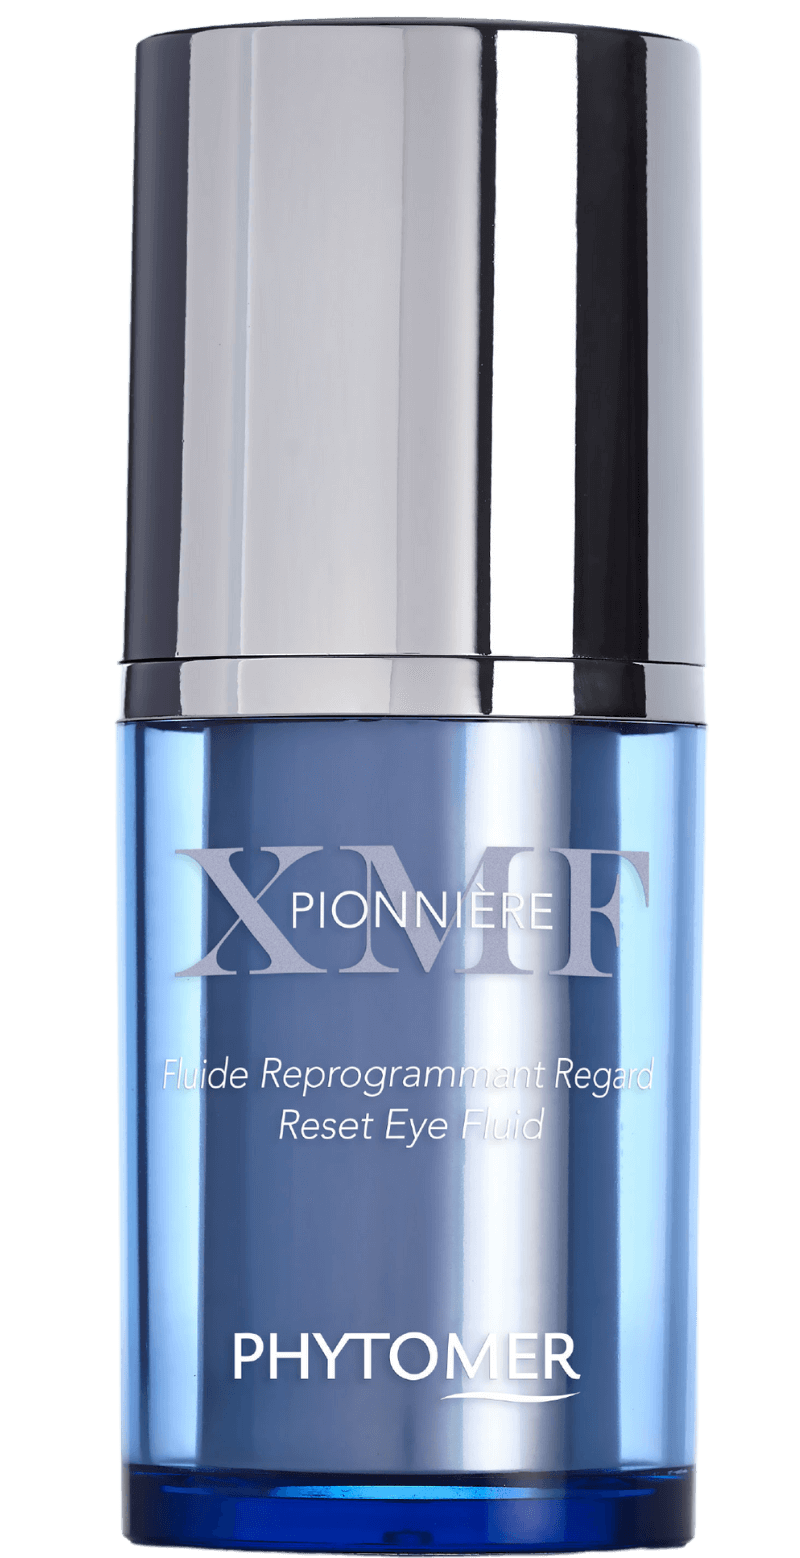 's Phytomer PIONNIERE XMF Reset Eye Fluid - Bellini's Skin and Parfumerie 